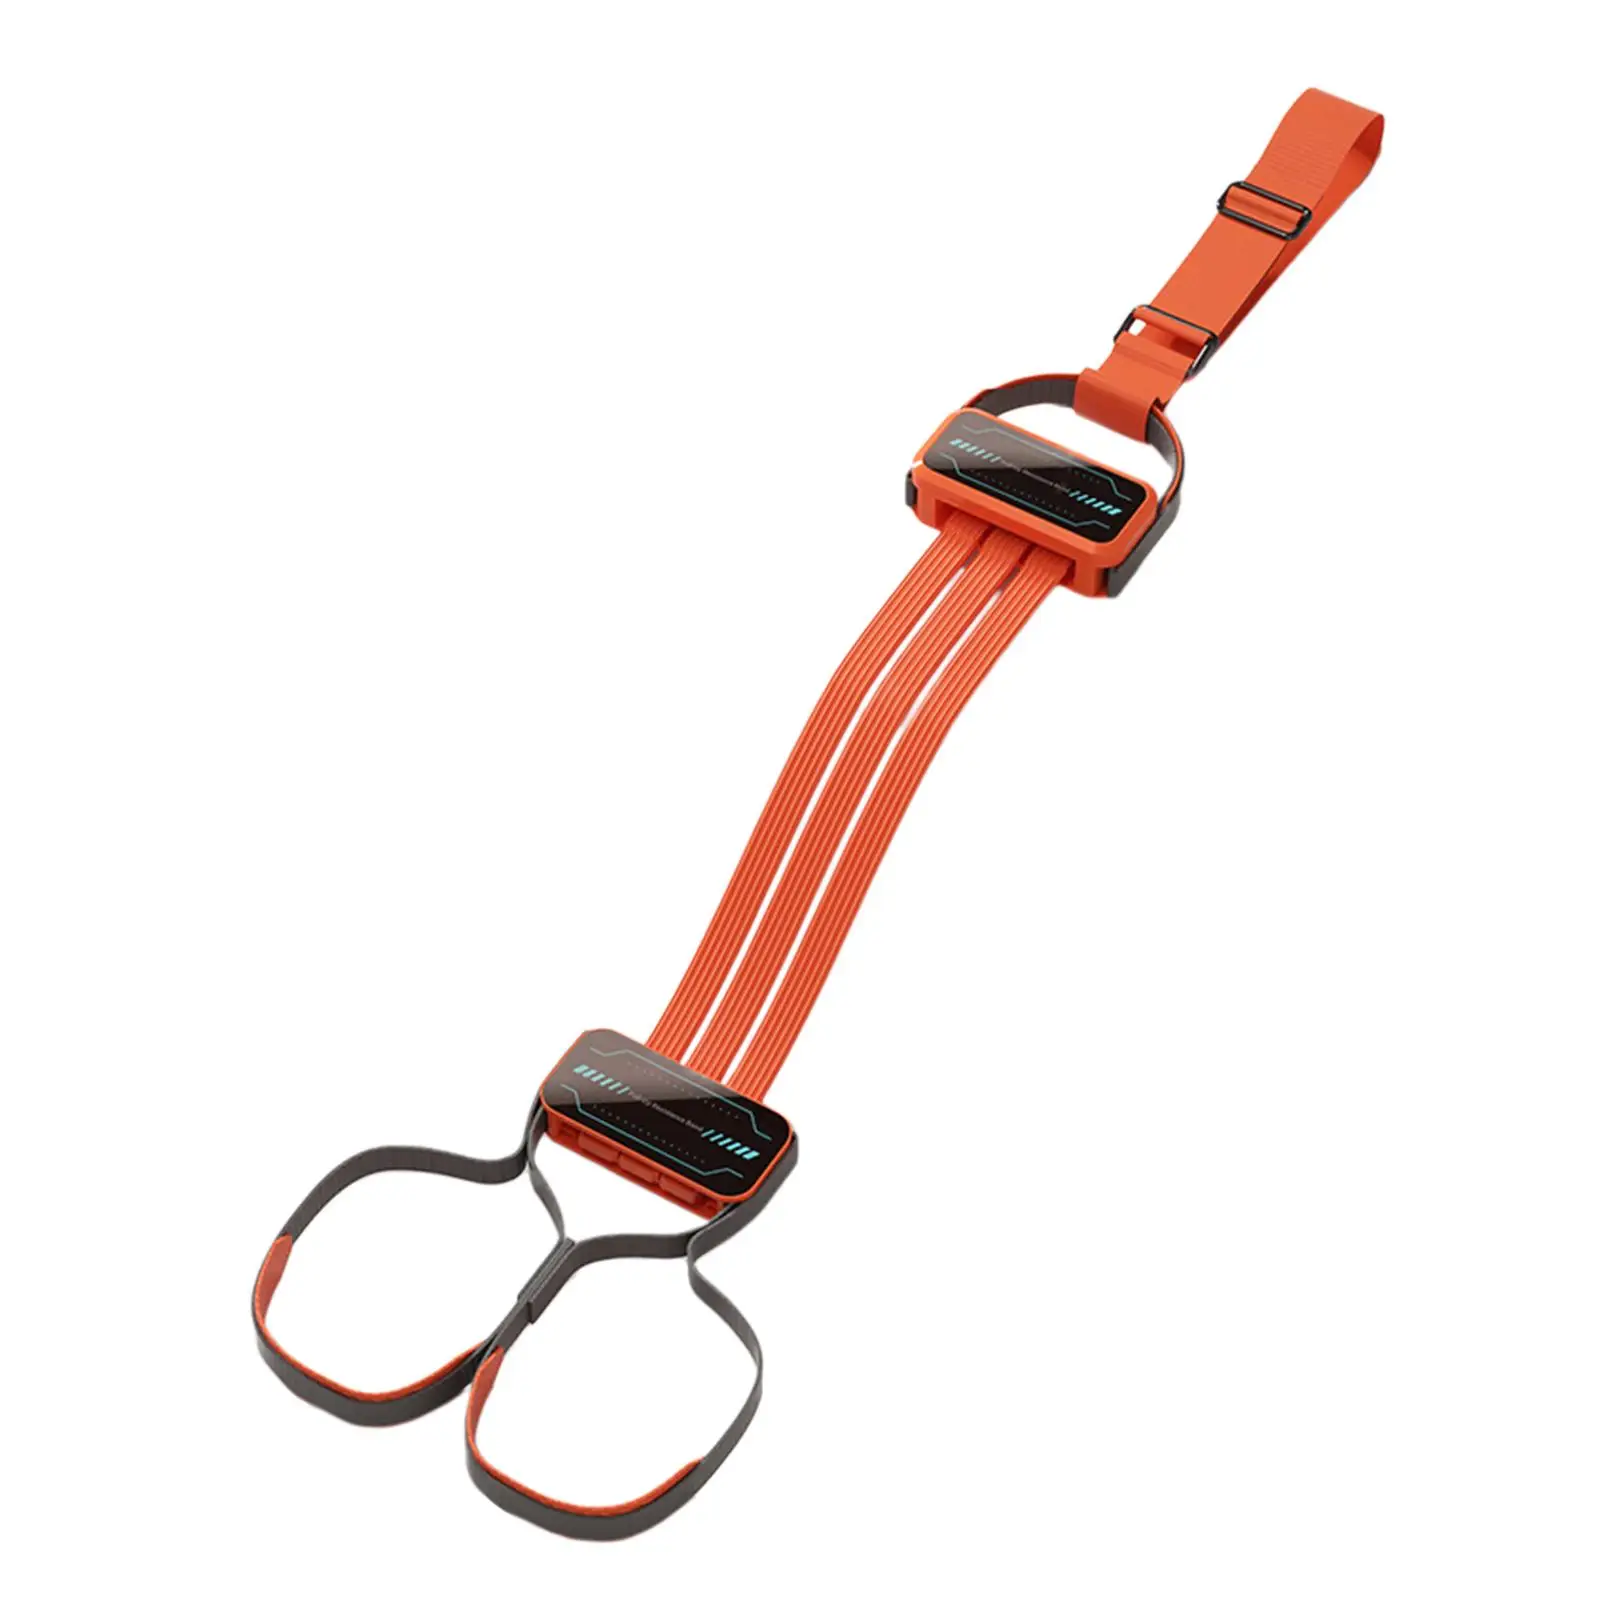 Pull up Assistance Band Strength Training Exercise Elastic with Feet Rest